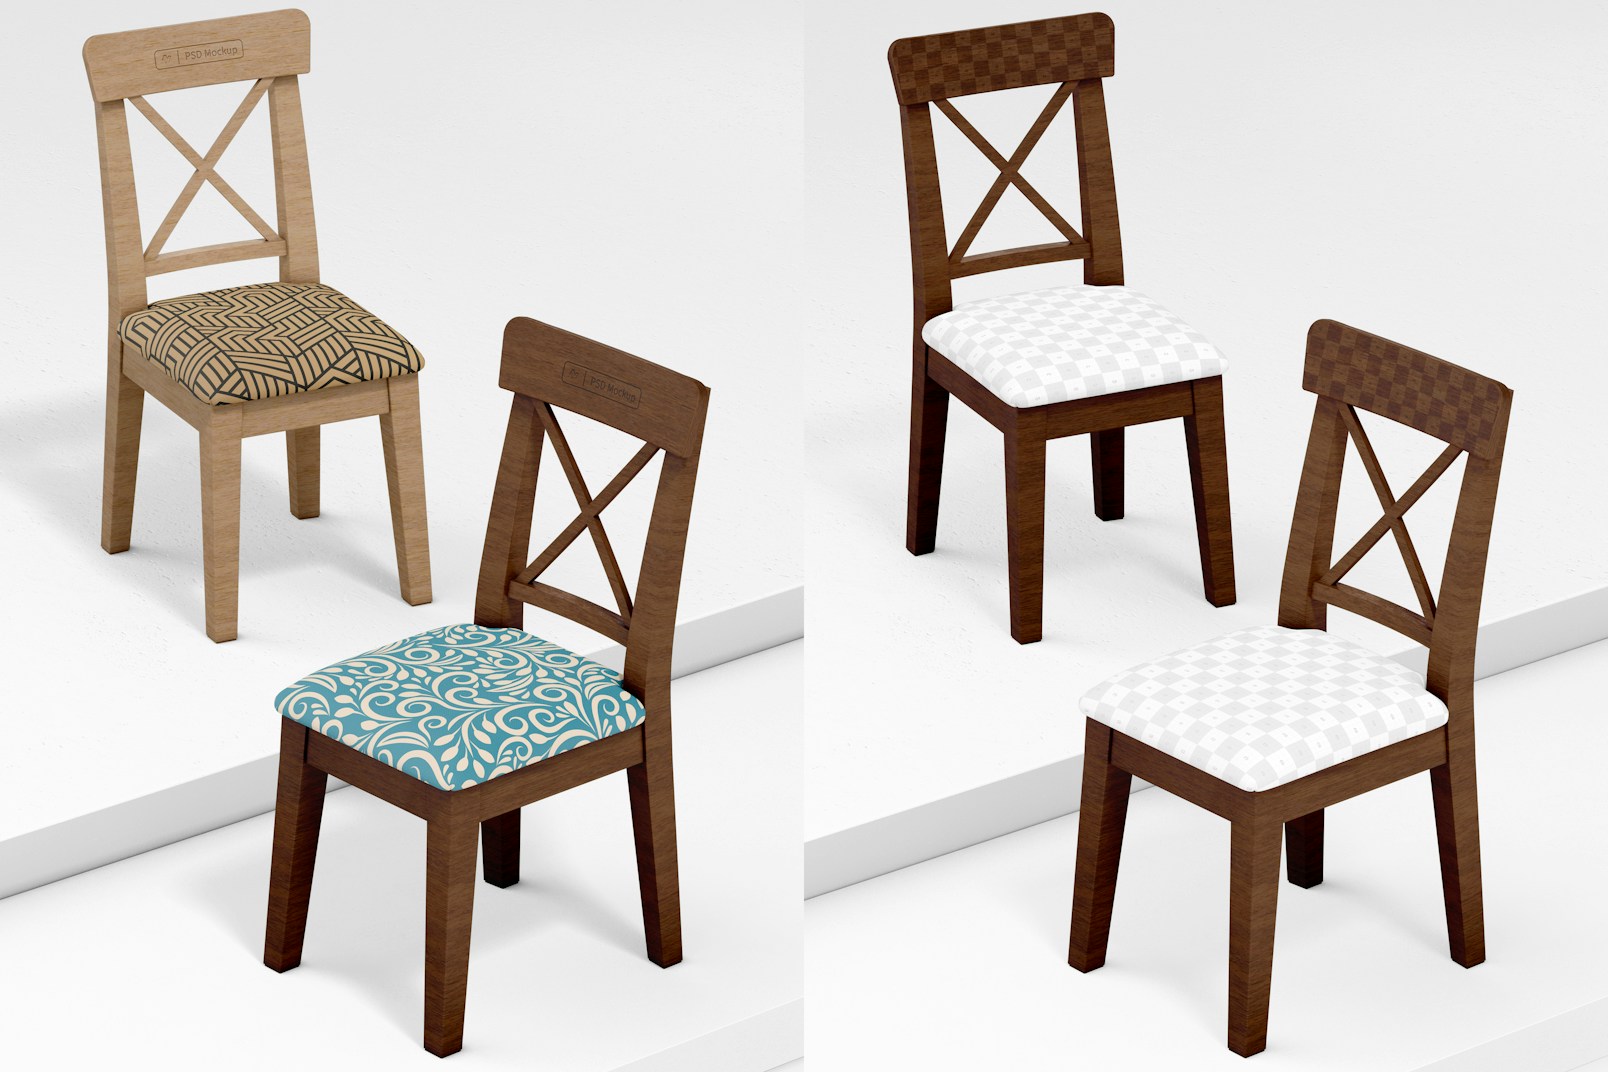 Wooden Dining Chairs Mockup